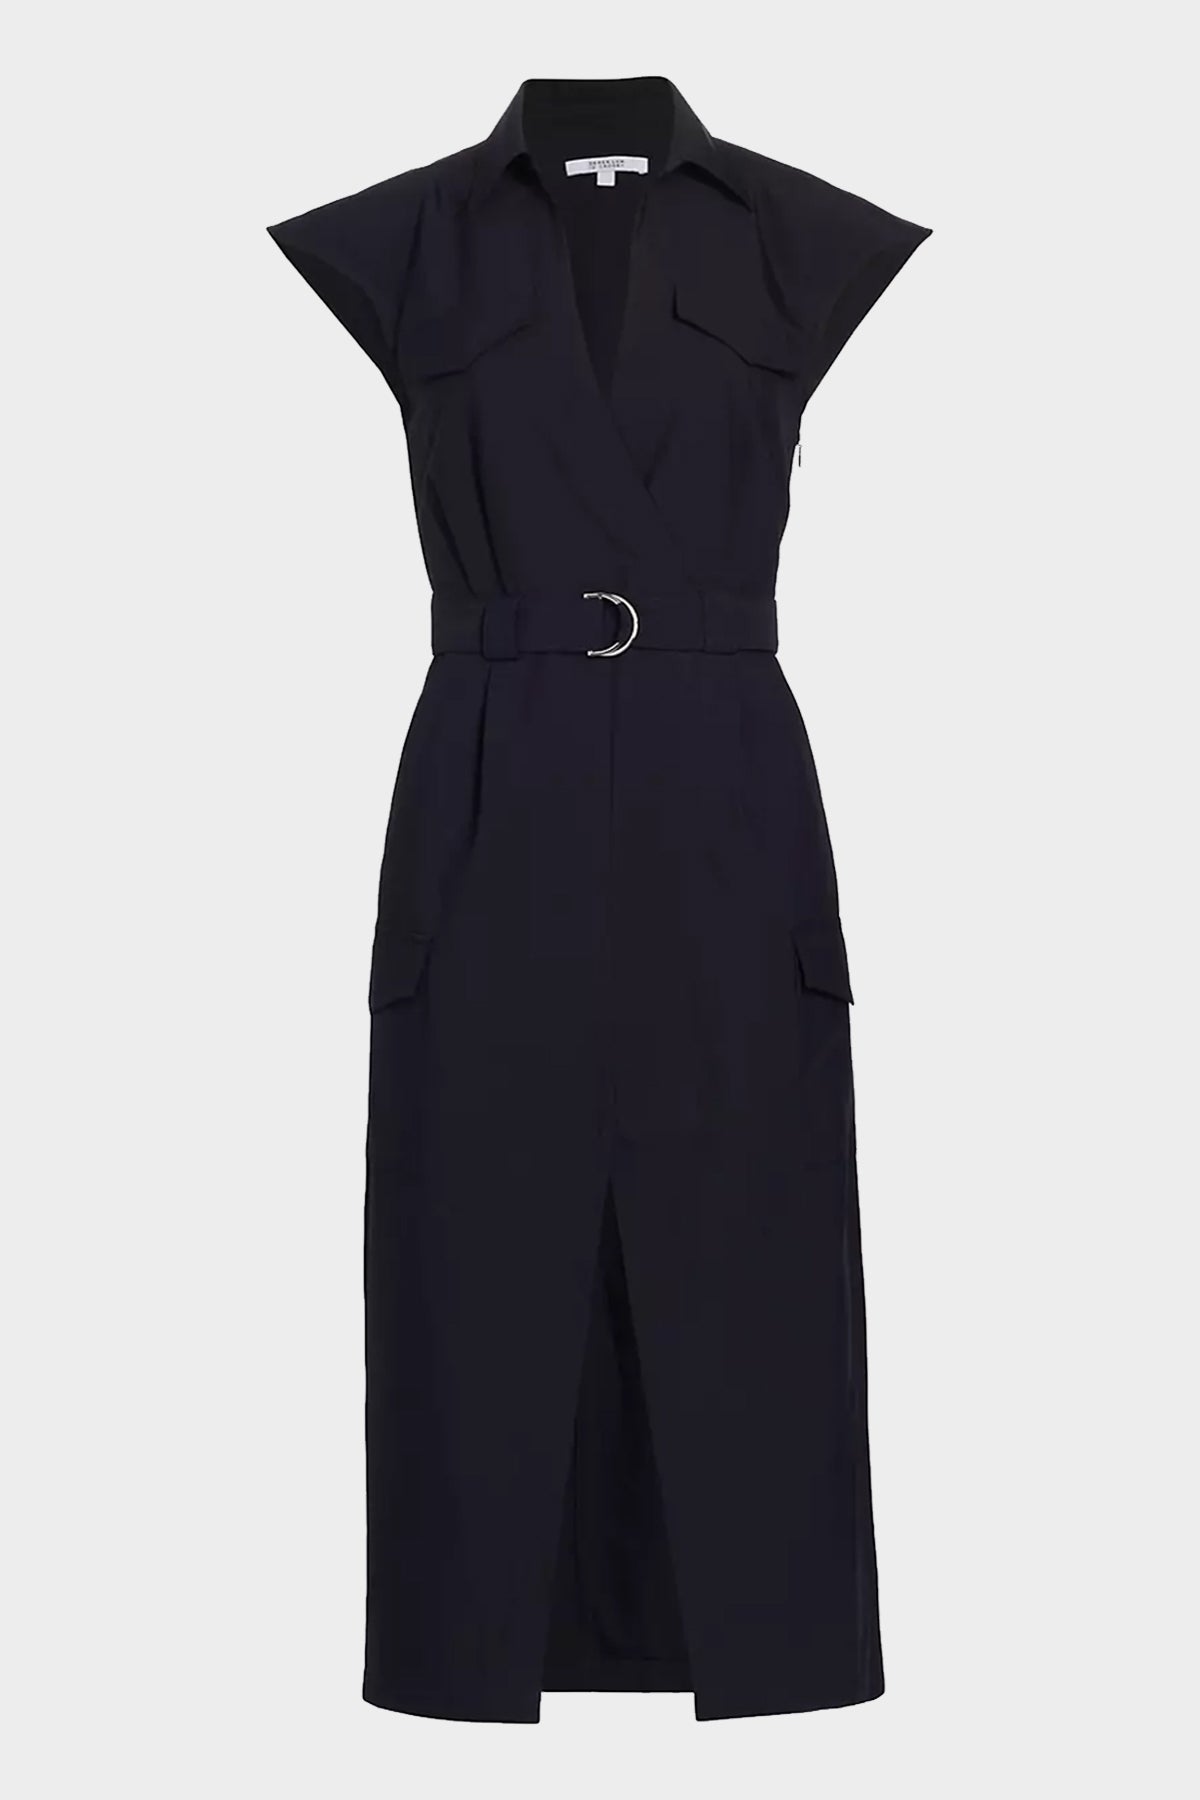 Lucy Utility Shirtdress in Midnight - shop-olivia.com